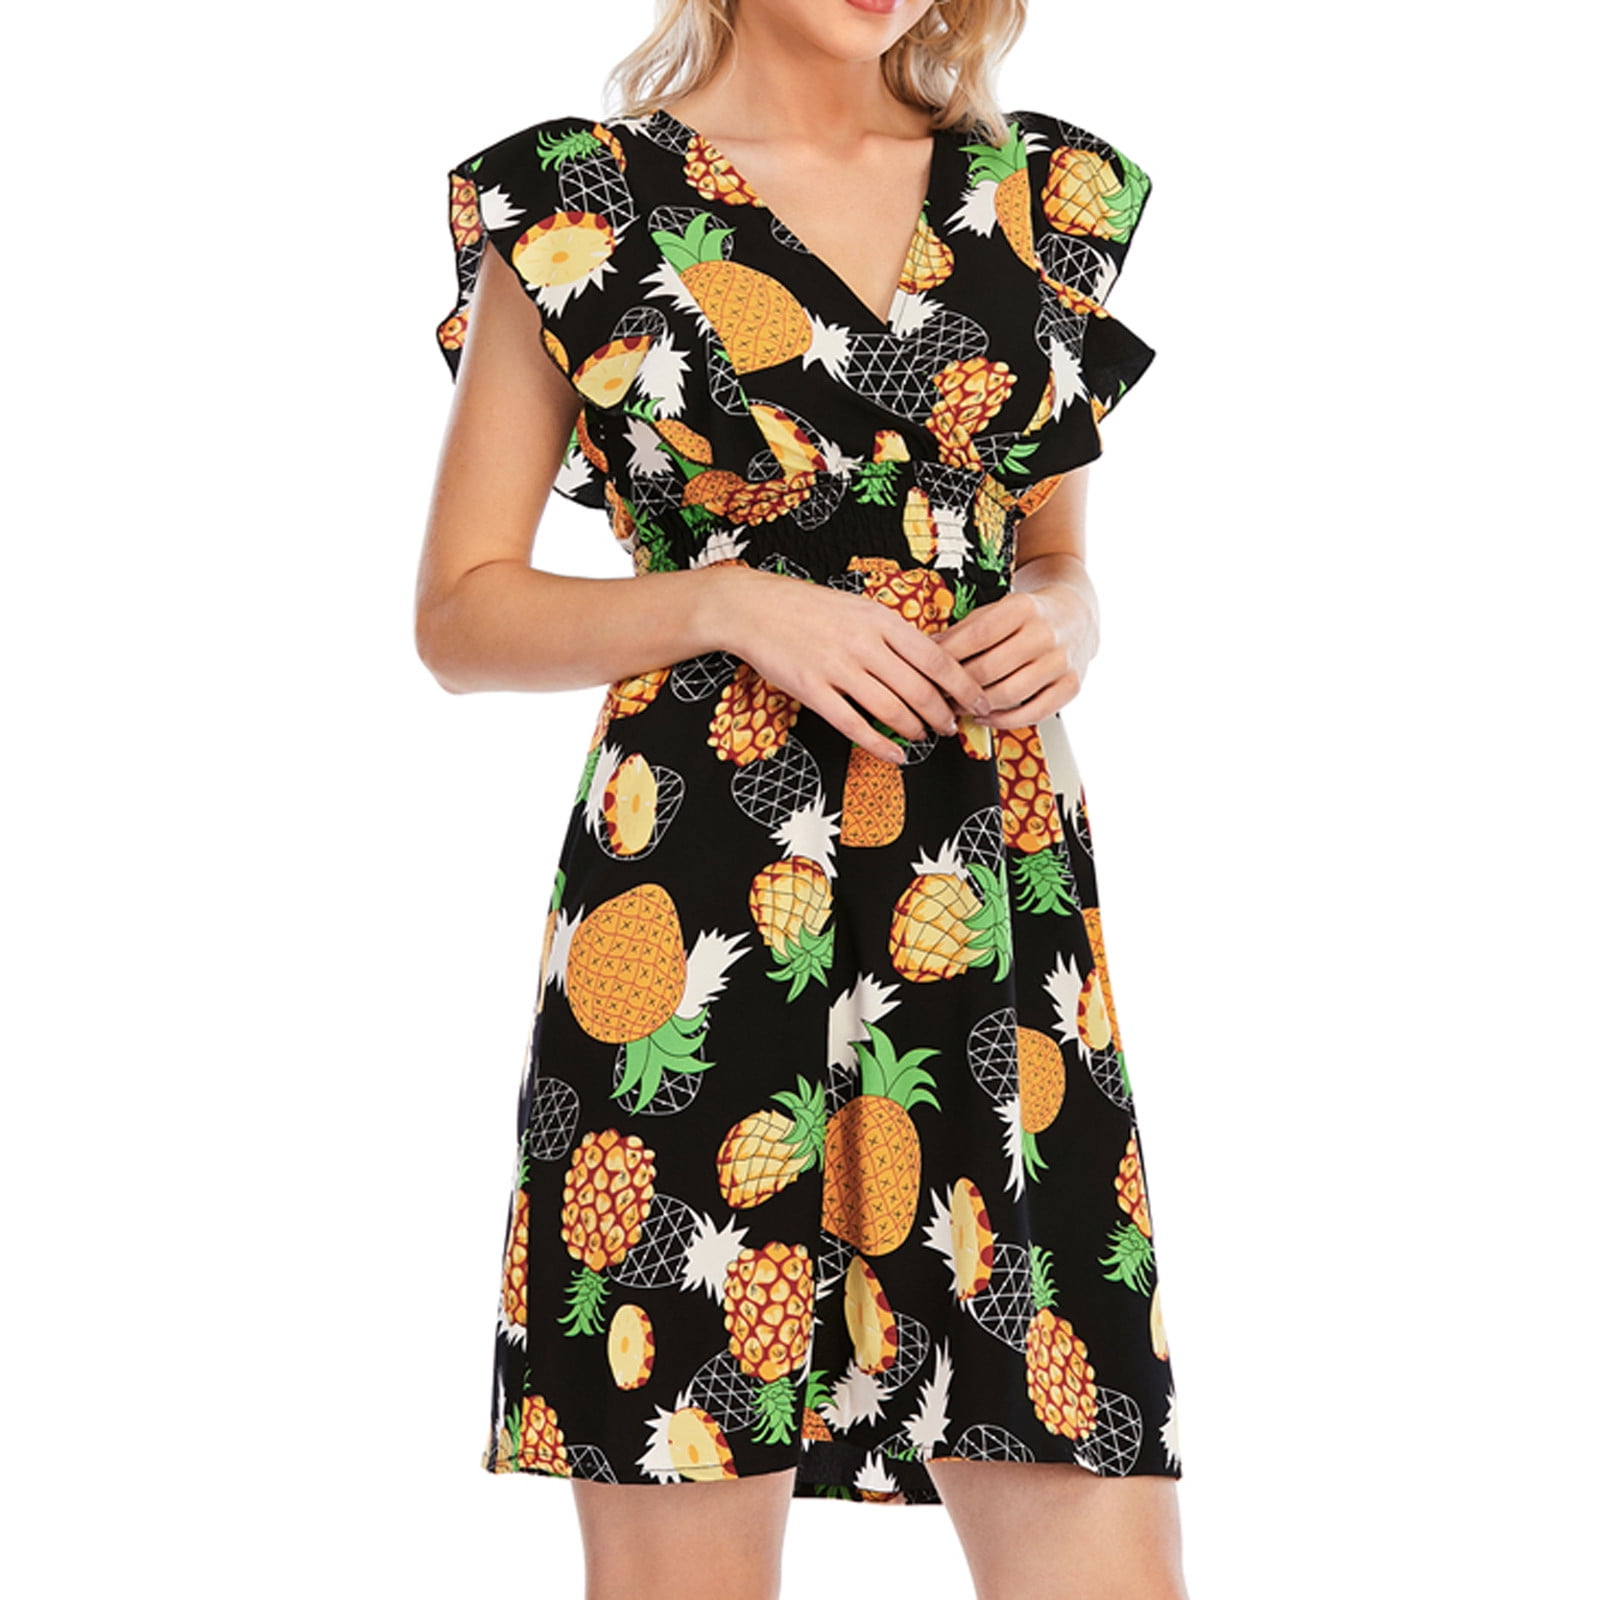 SO-buts Women Maternity Summer Off Shoulder Pineapple Print Casual Pregnancy Dress Bodycon Cocktail Dresses